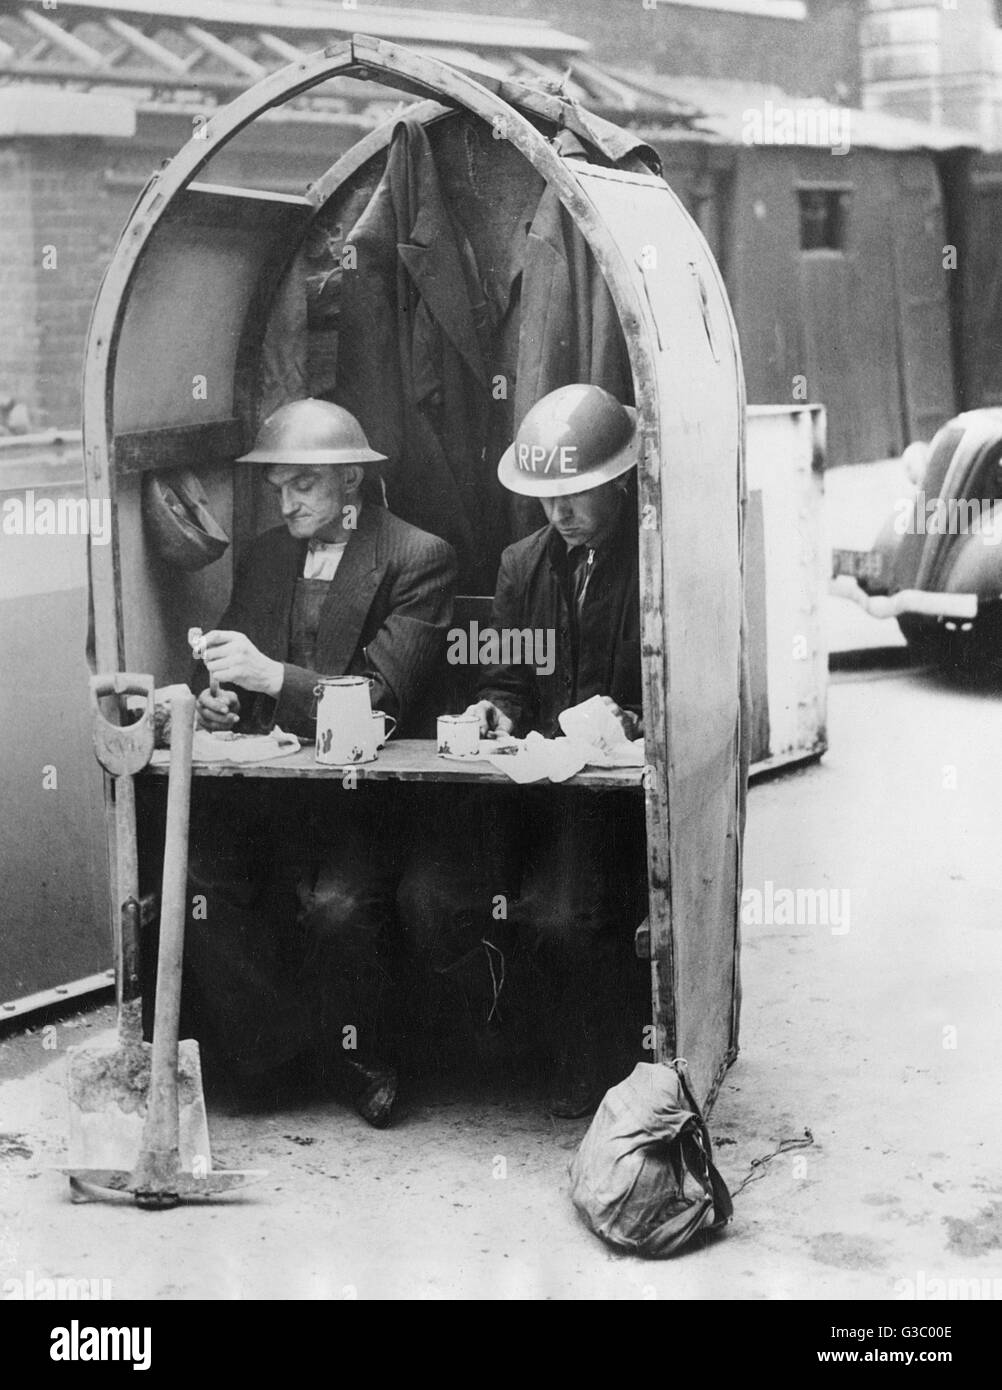 Keep Calm and Carry On. A quite fantastic photograph showing two workmen engaged in repairing air raid damage in the London area continue with their 'private' luncheon although the sirens have sounded another 'alert' - October, 1940.     Date: 1940 Stock Photo